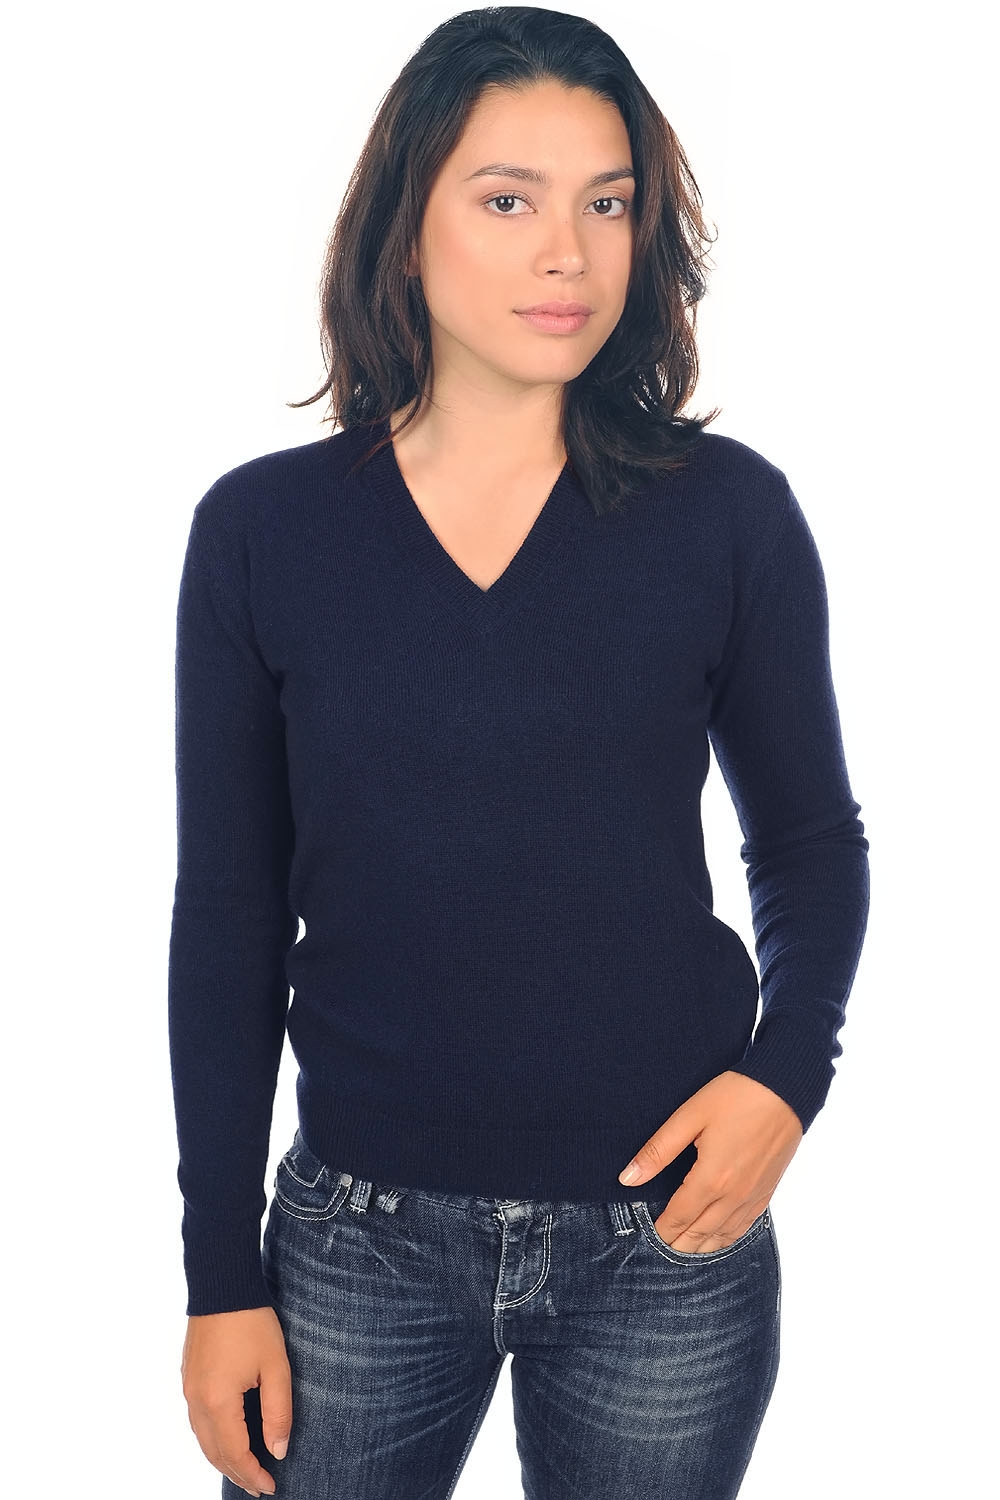 Cashmere ladies basic sweaters at low prices tessa first dress blue 2xl